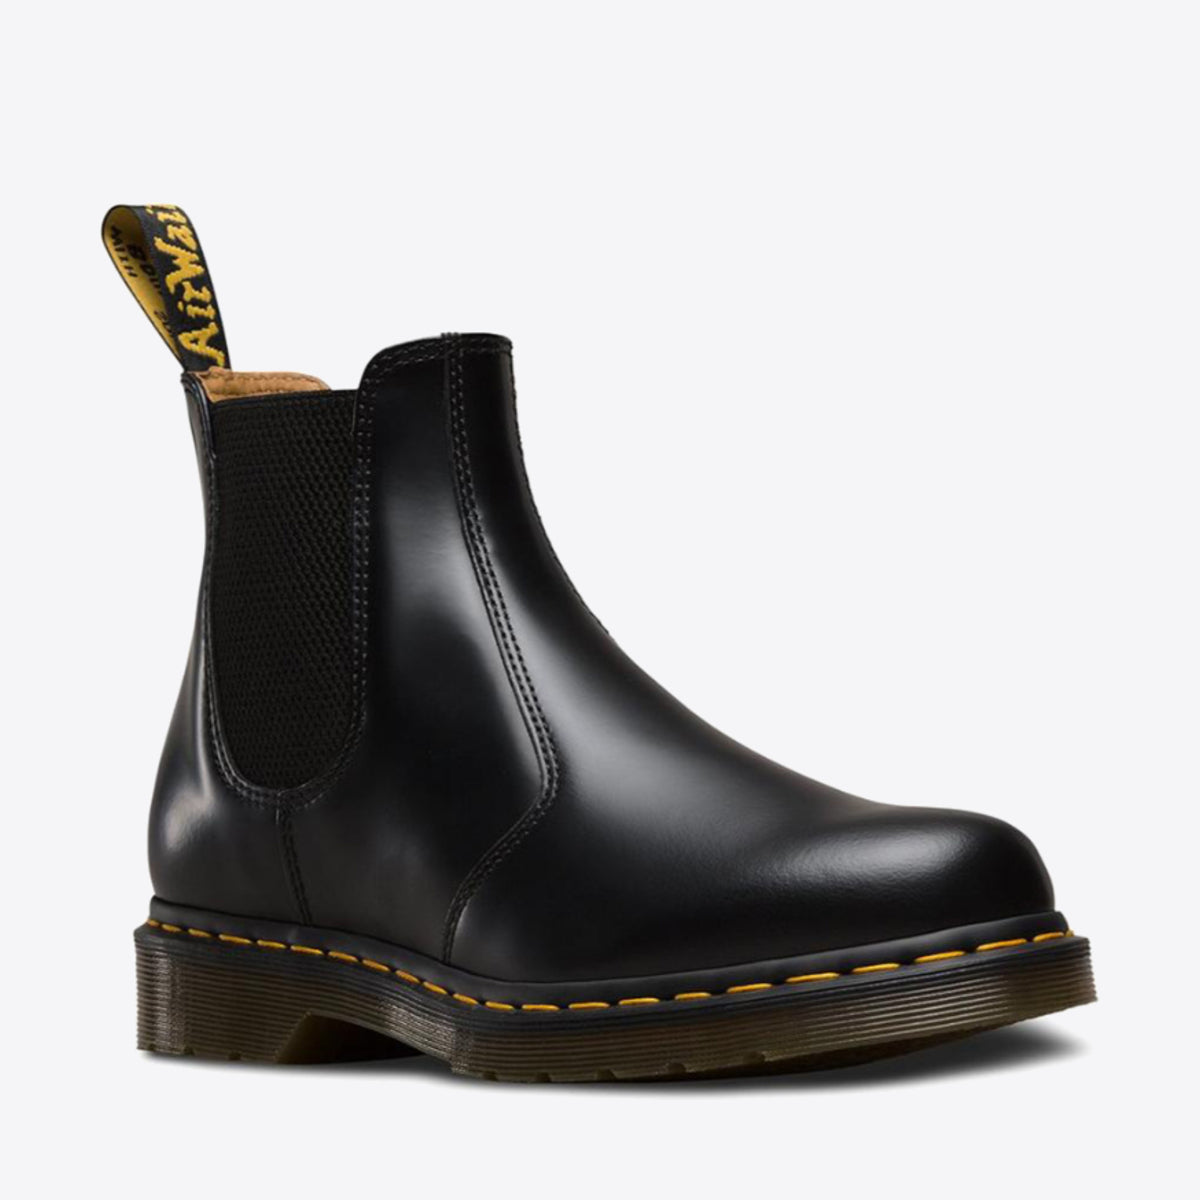 DR MARTENS 2976 Yellow Stitch Chelsea Boot Black Smooth - Image 5